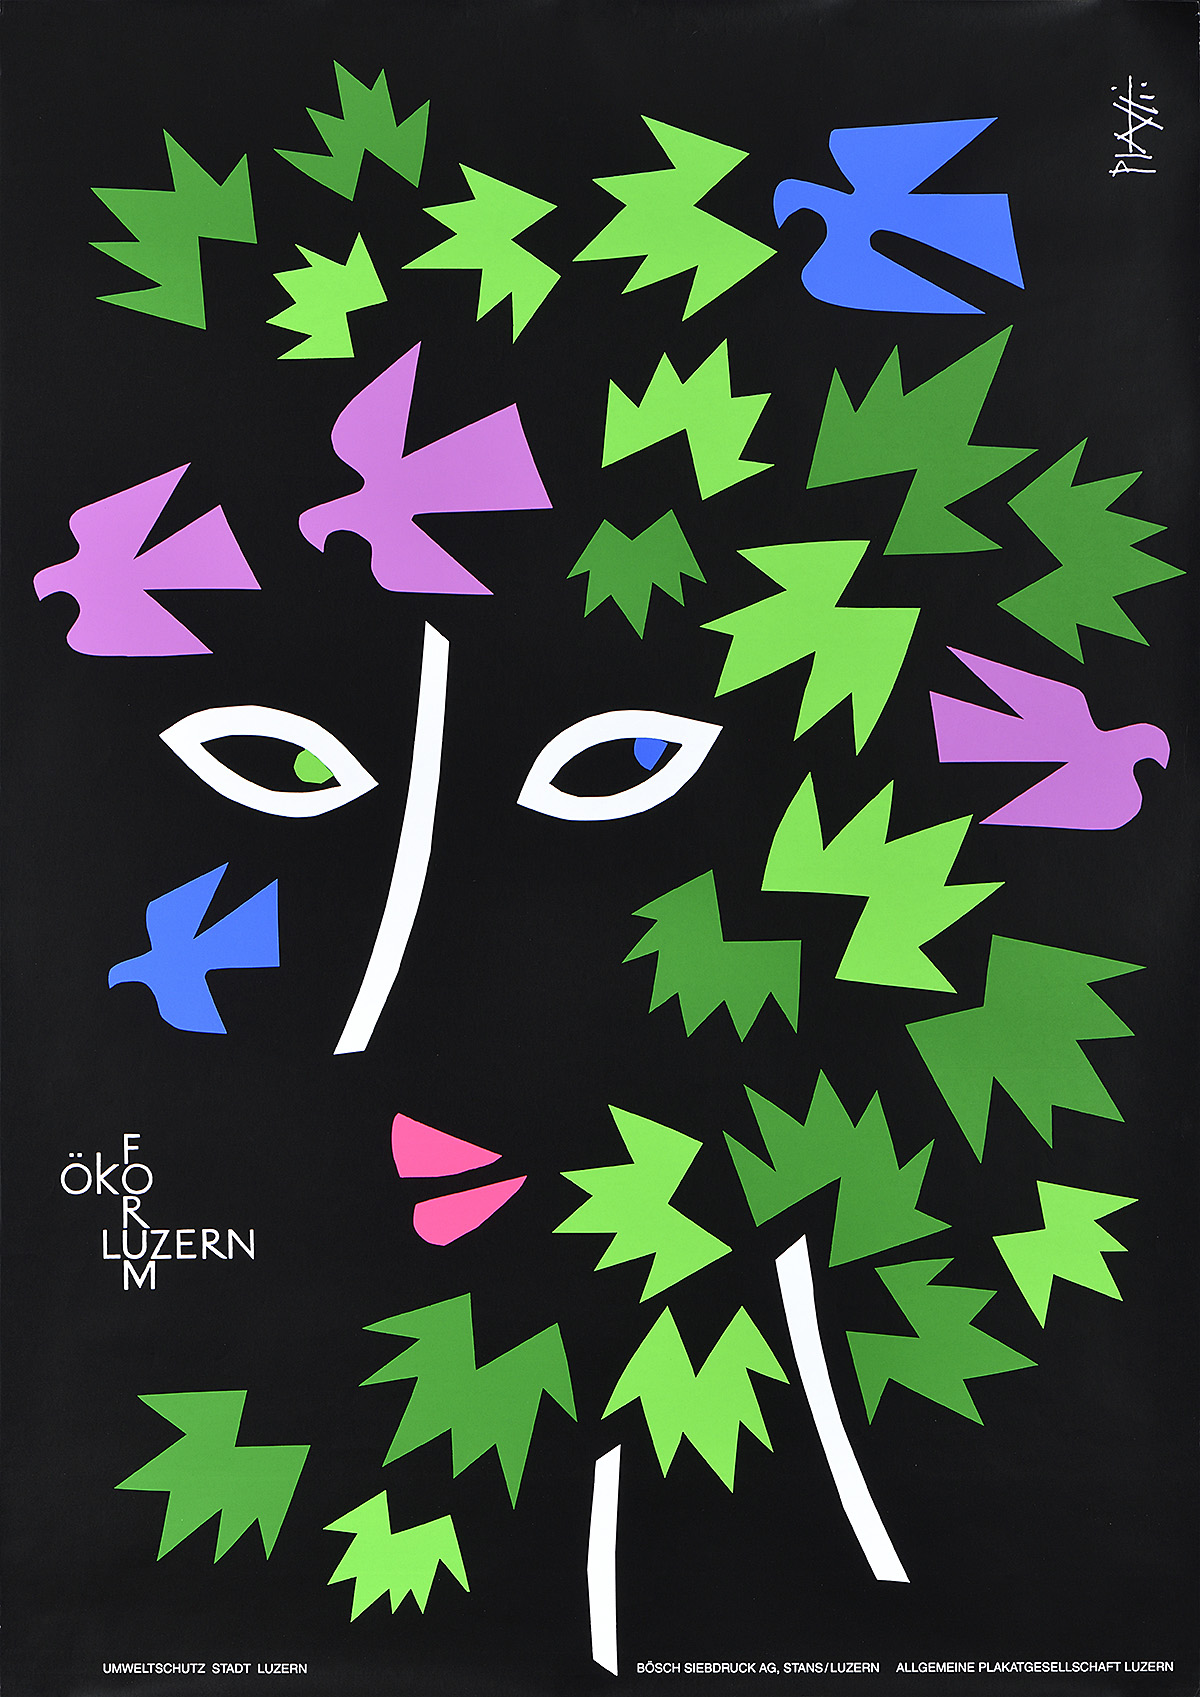 A poster of an outline of a woman's face surrounded by cutouts of geometric birds and plants.